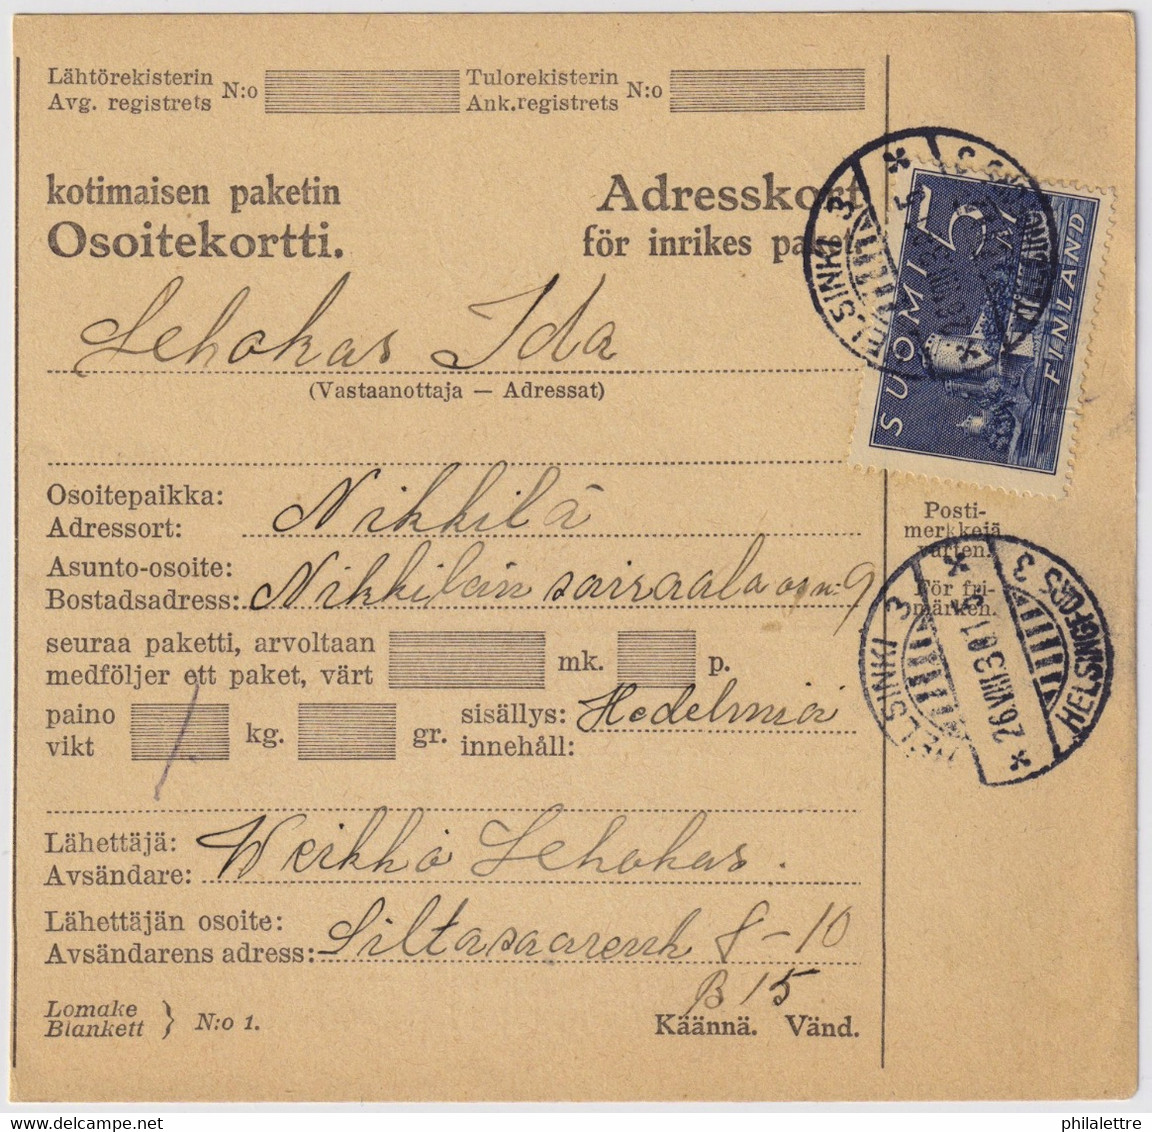 FINLANDE / SUOMI FINLAND 1930 HELSINKI 3 To NICKBY - Osoitekortti / Packet Post Address Card - Covers & Documents